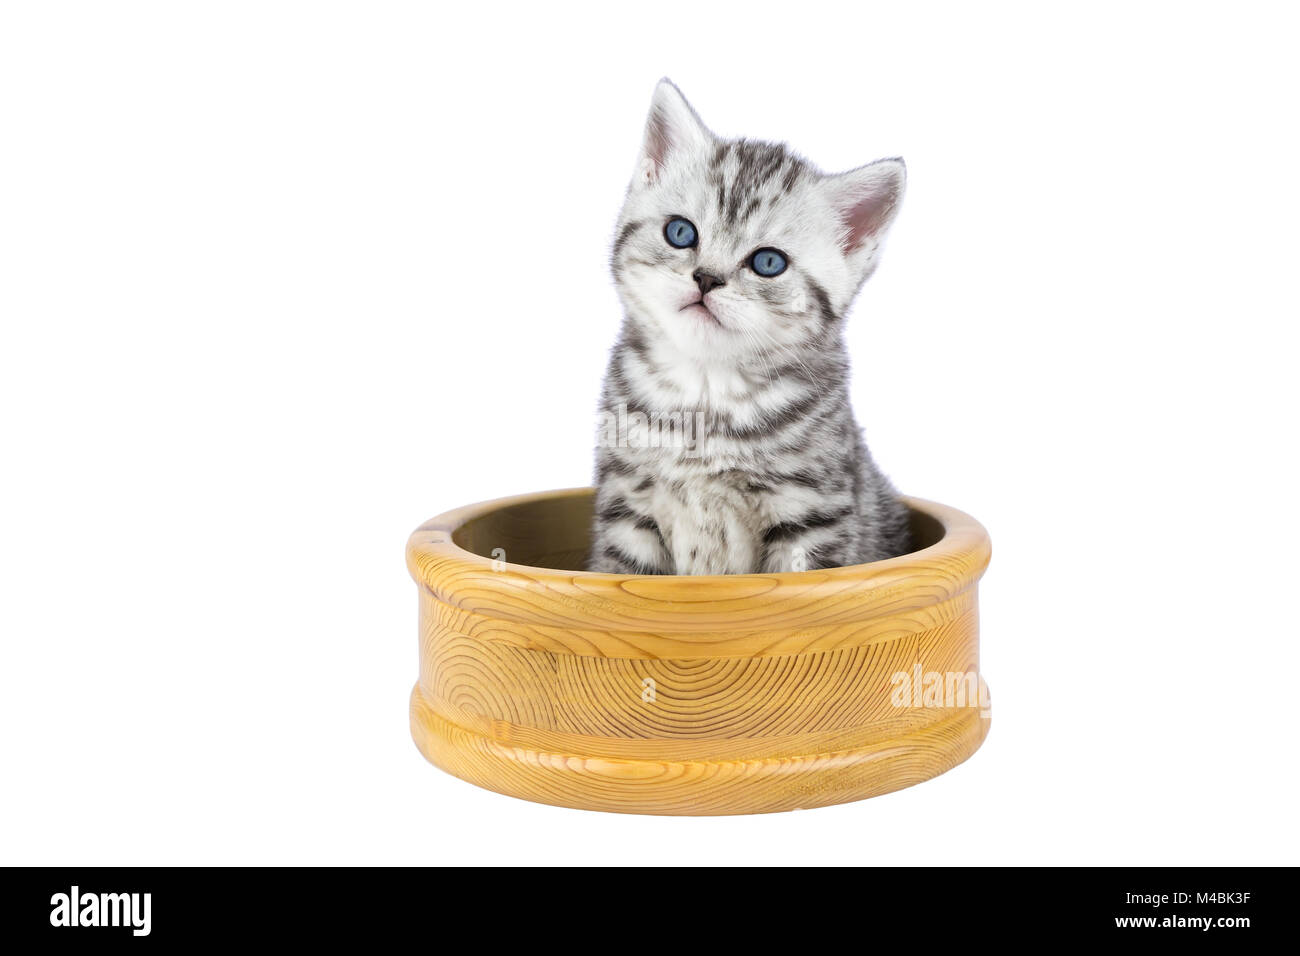 Young silver tabby cat sitting in wooden bowl Stock Photo